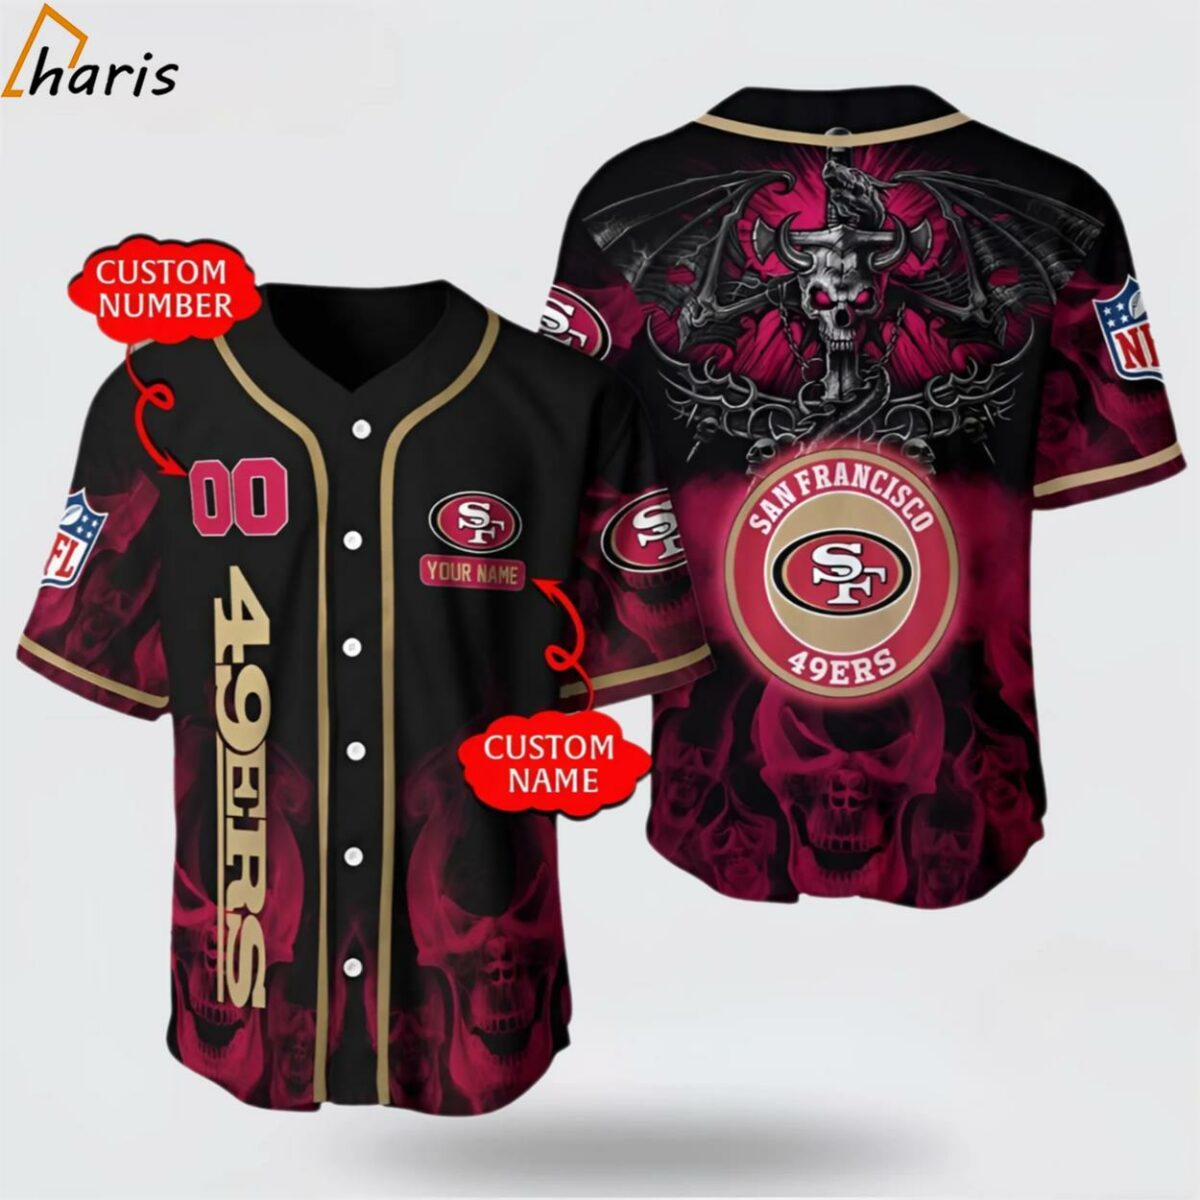 NFL San Francisco 49ers 3D Personalized Skull Limited Edition Collection Baseball Jersey 1 jersey